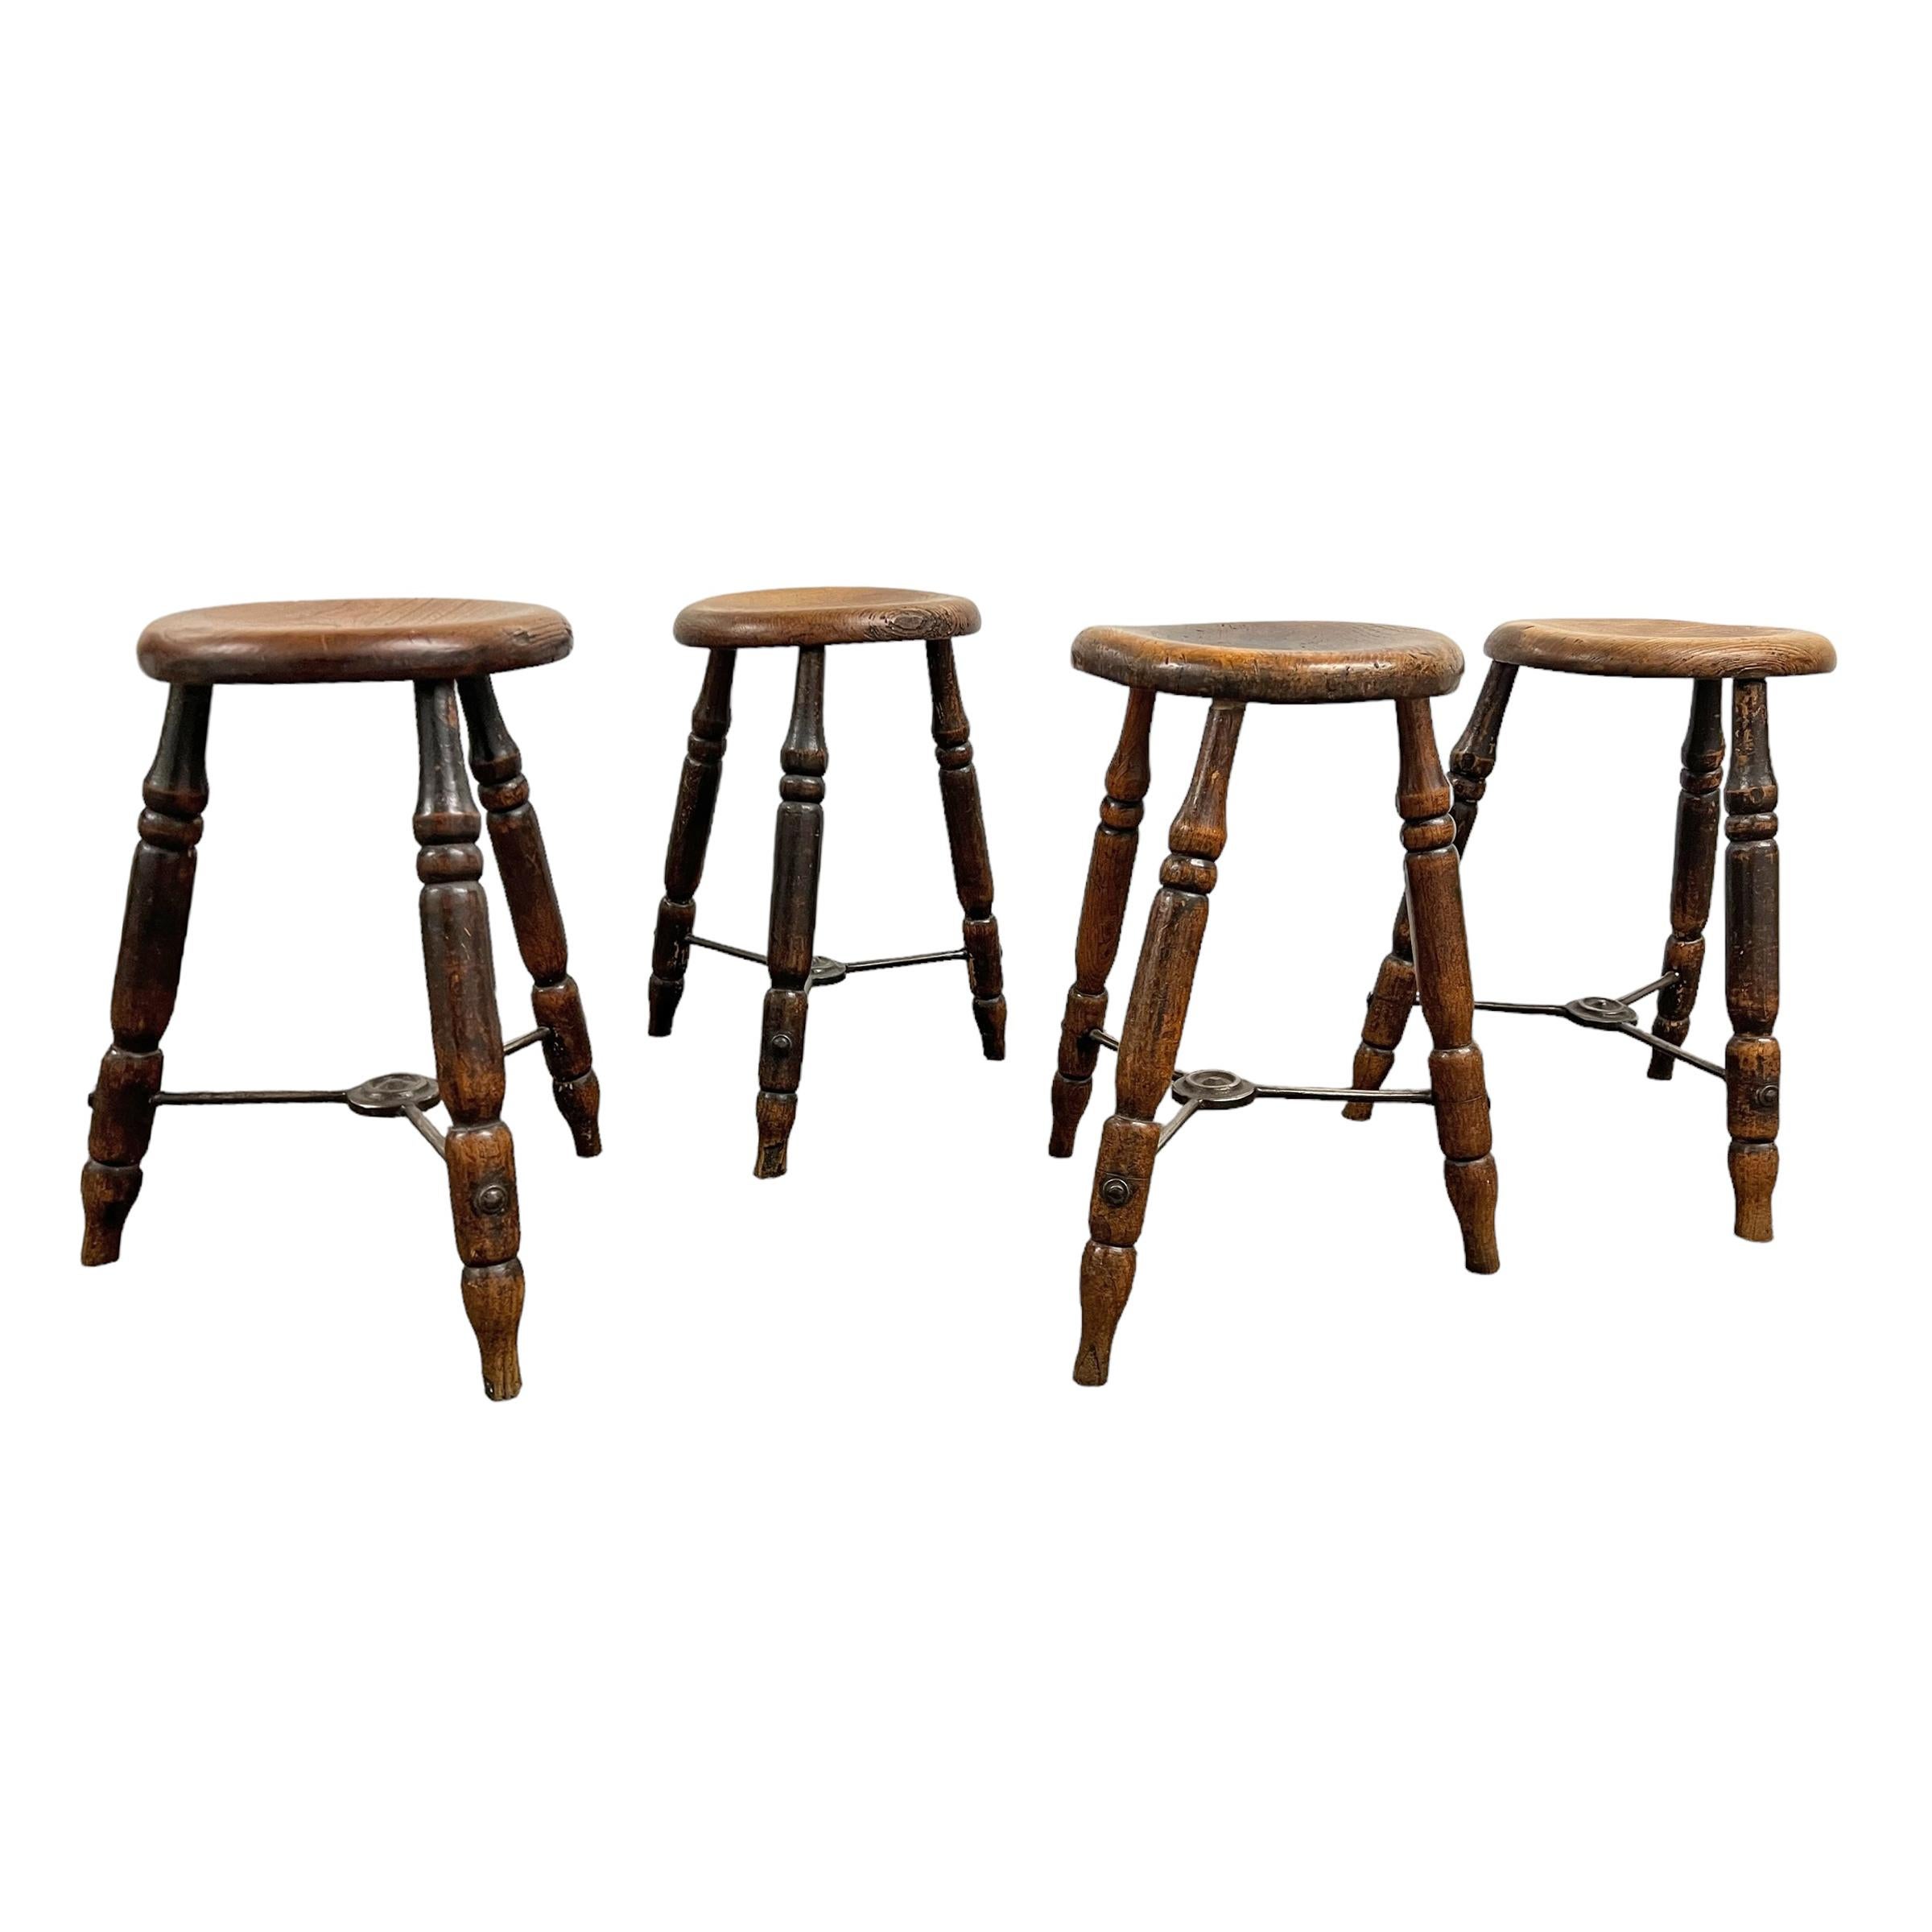 Rustic Set of Four 19th Century English Pub Stools For Sale